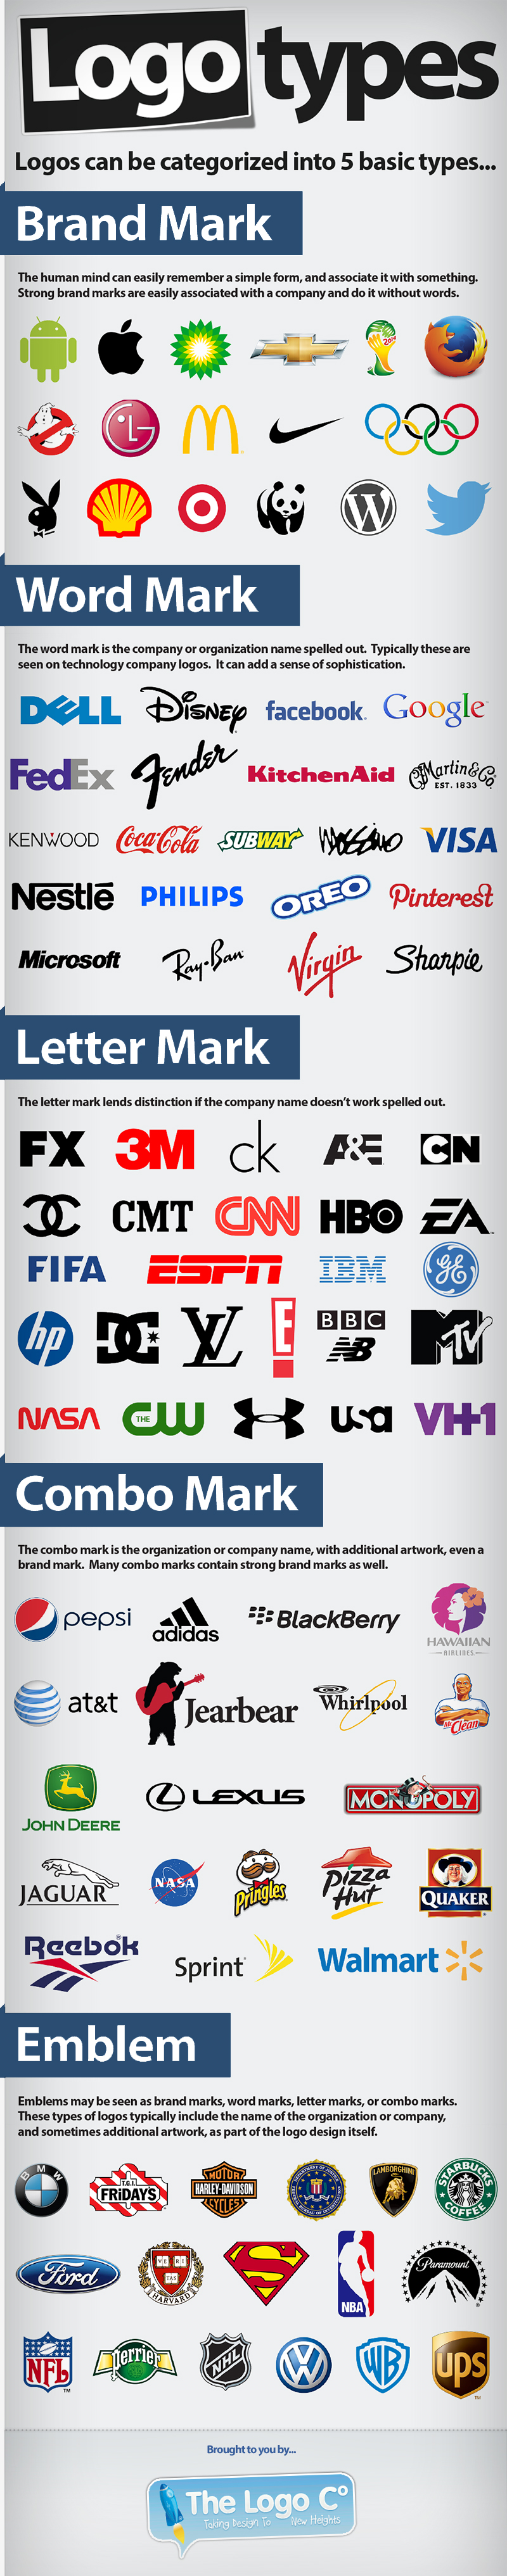 logos and their names